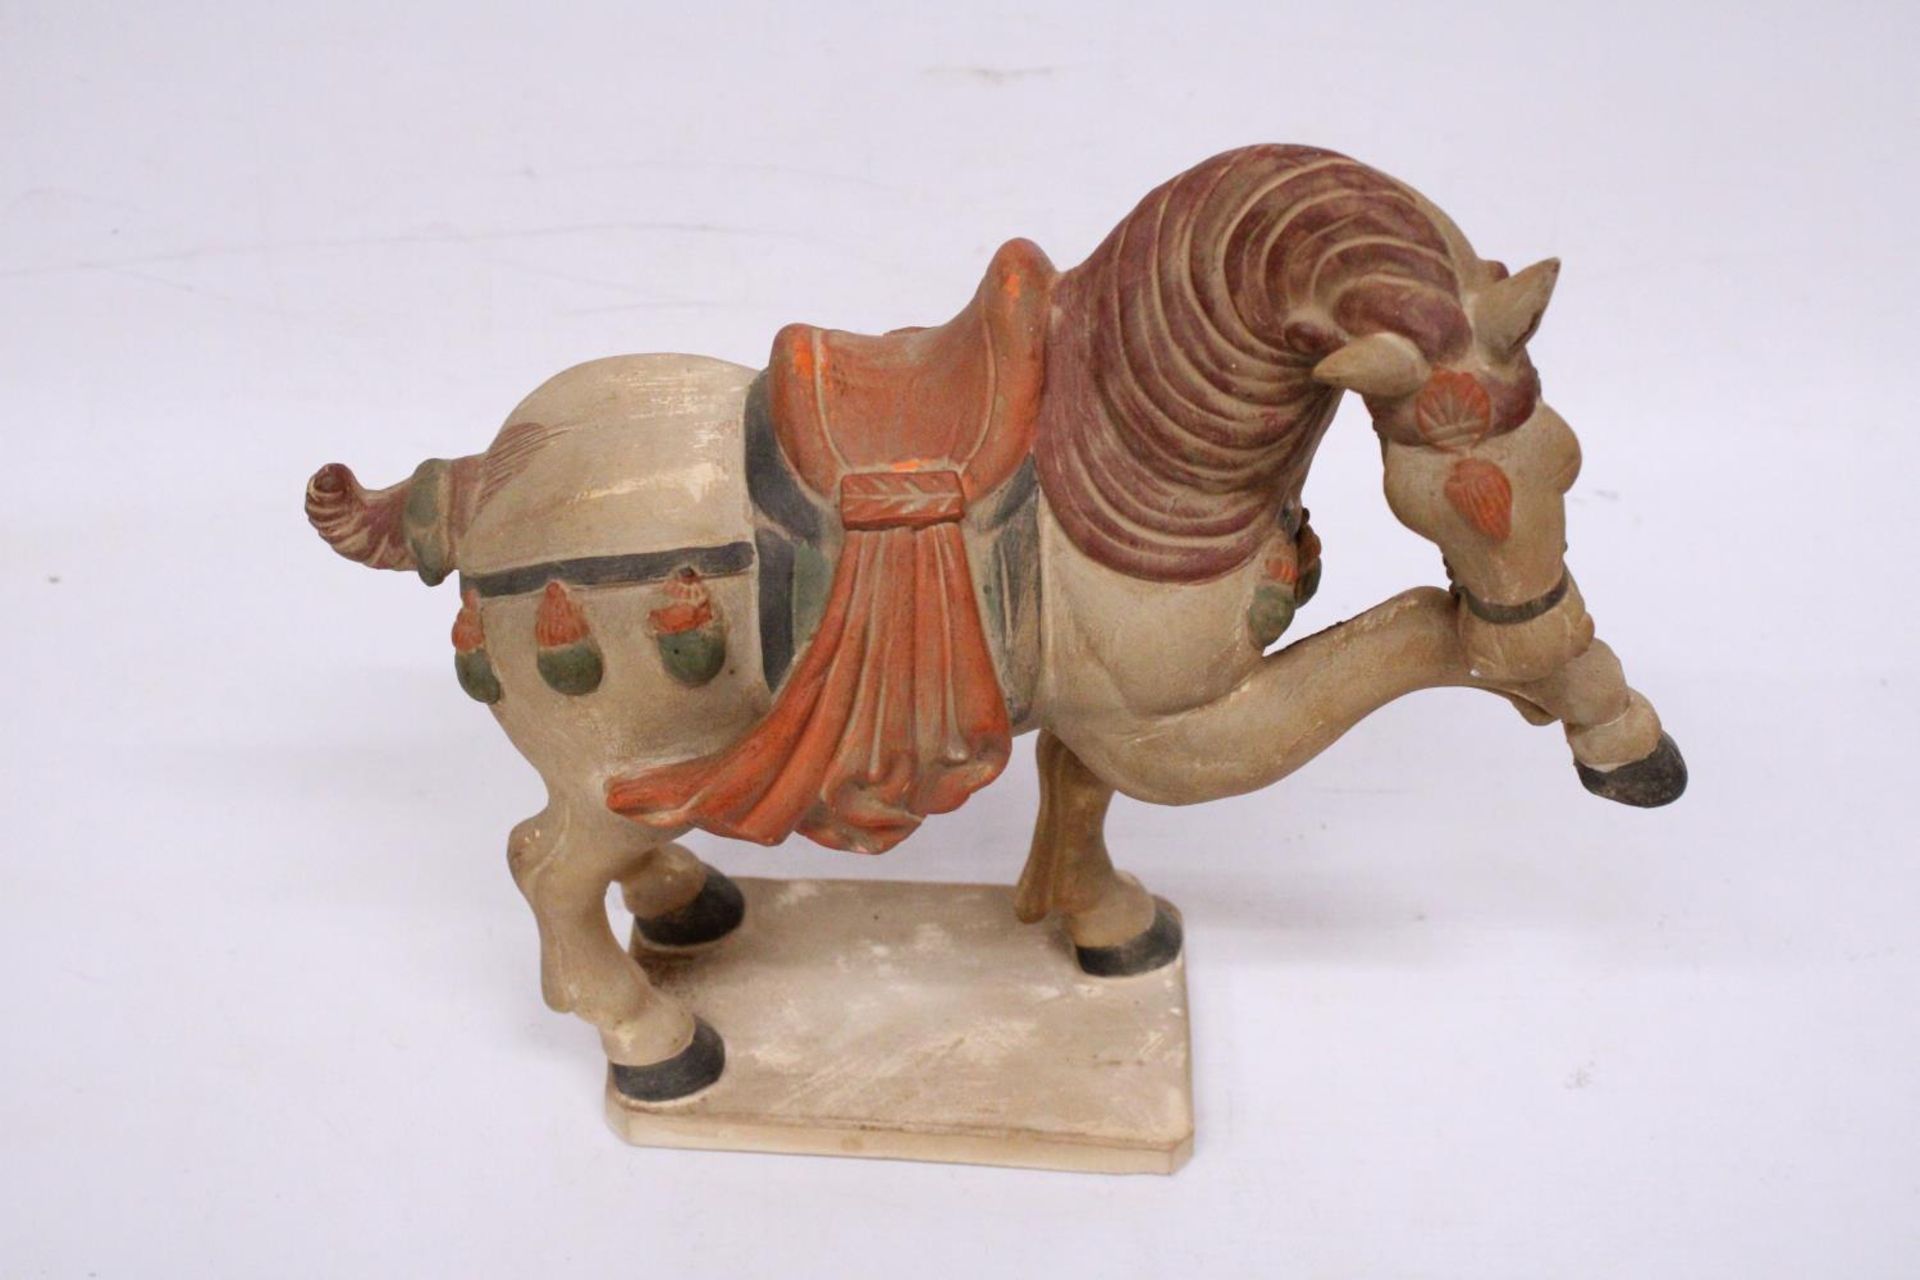 A CHINESE HORSE IN THE STYLE OF A TANG DYNASTY WARRIOR HORSE - 30 CM INCLUDE BASE - Image 5 of 5